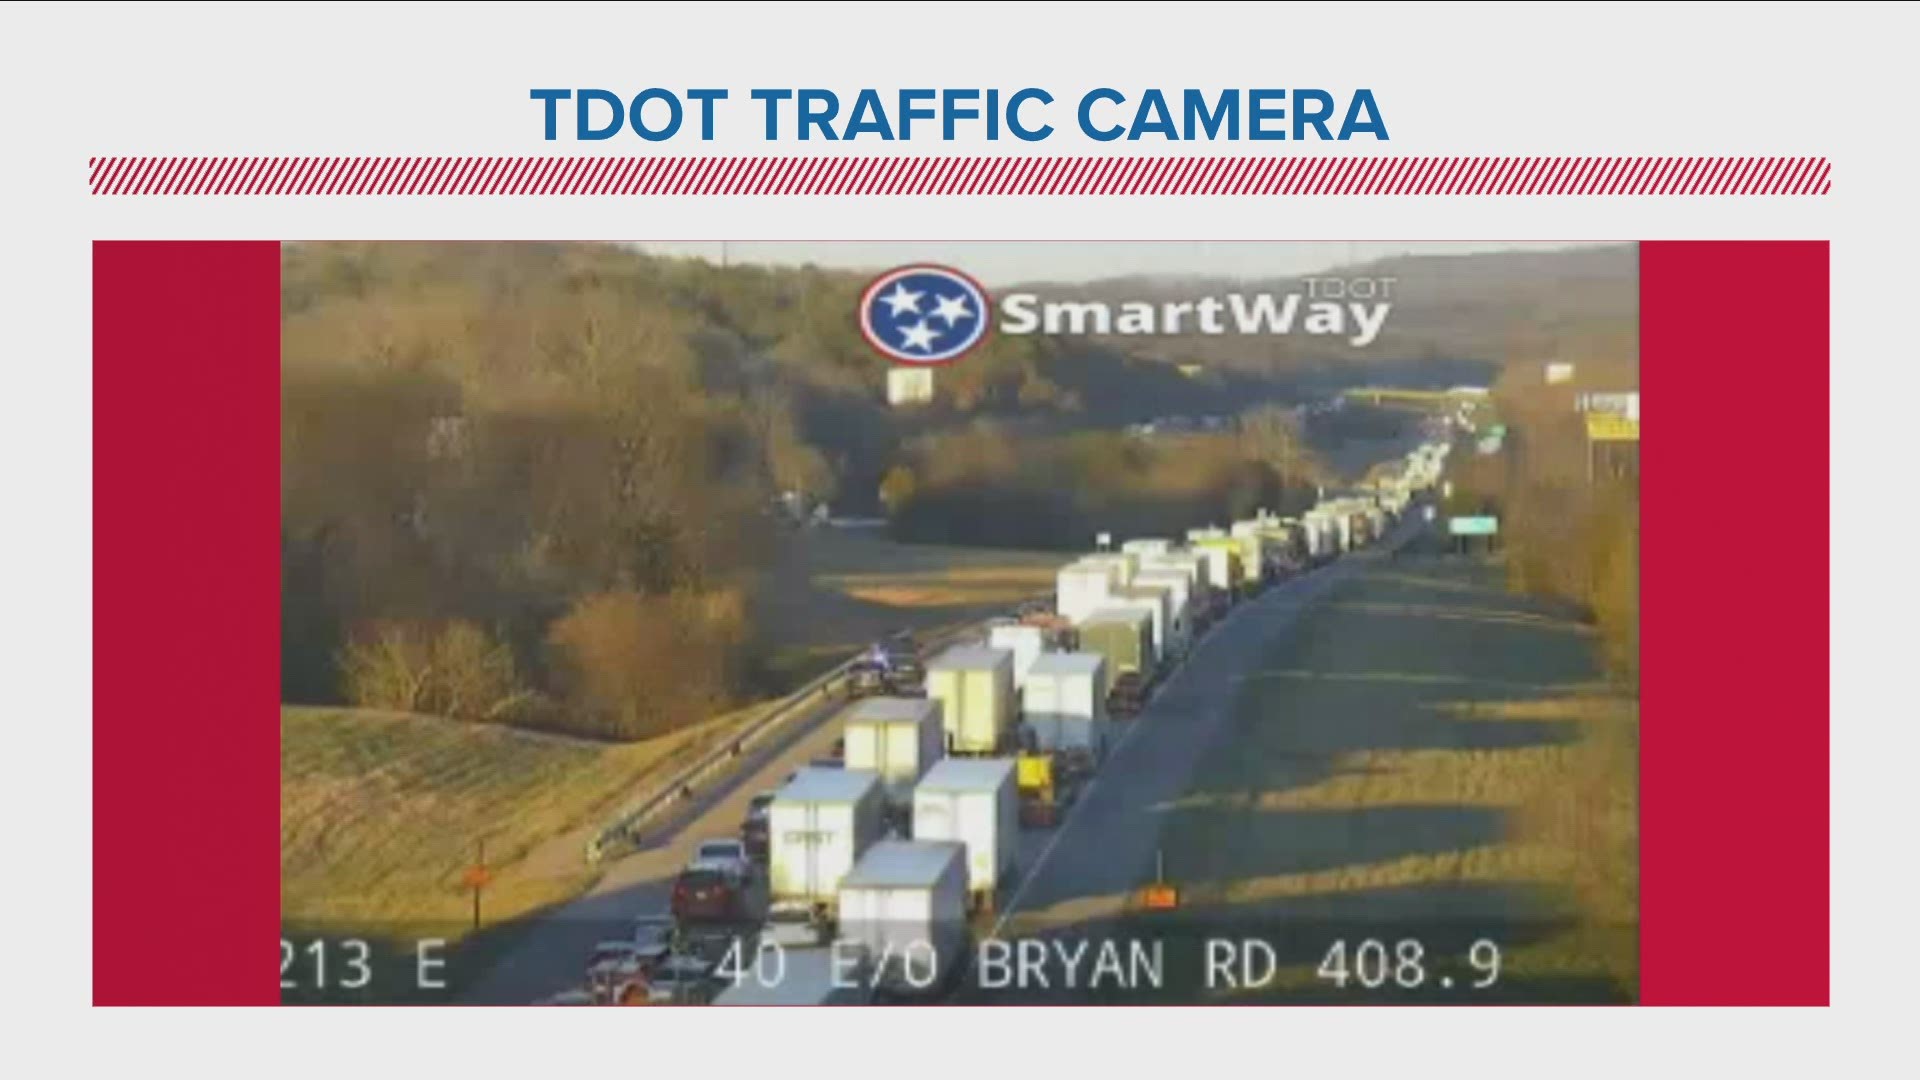 TDOT said several eastbound lanes of I-40 are blocked in Jefferson and Sevier Counties due to the crashes.